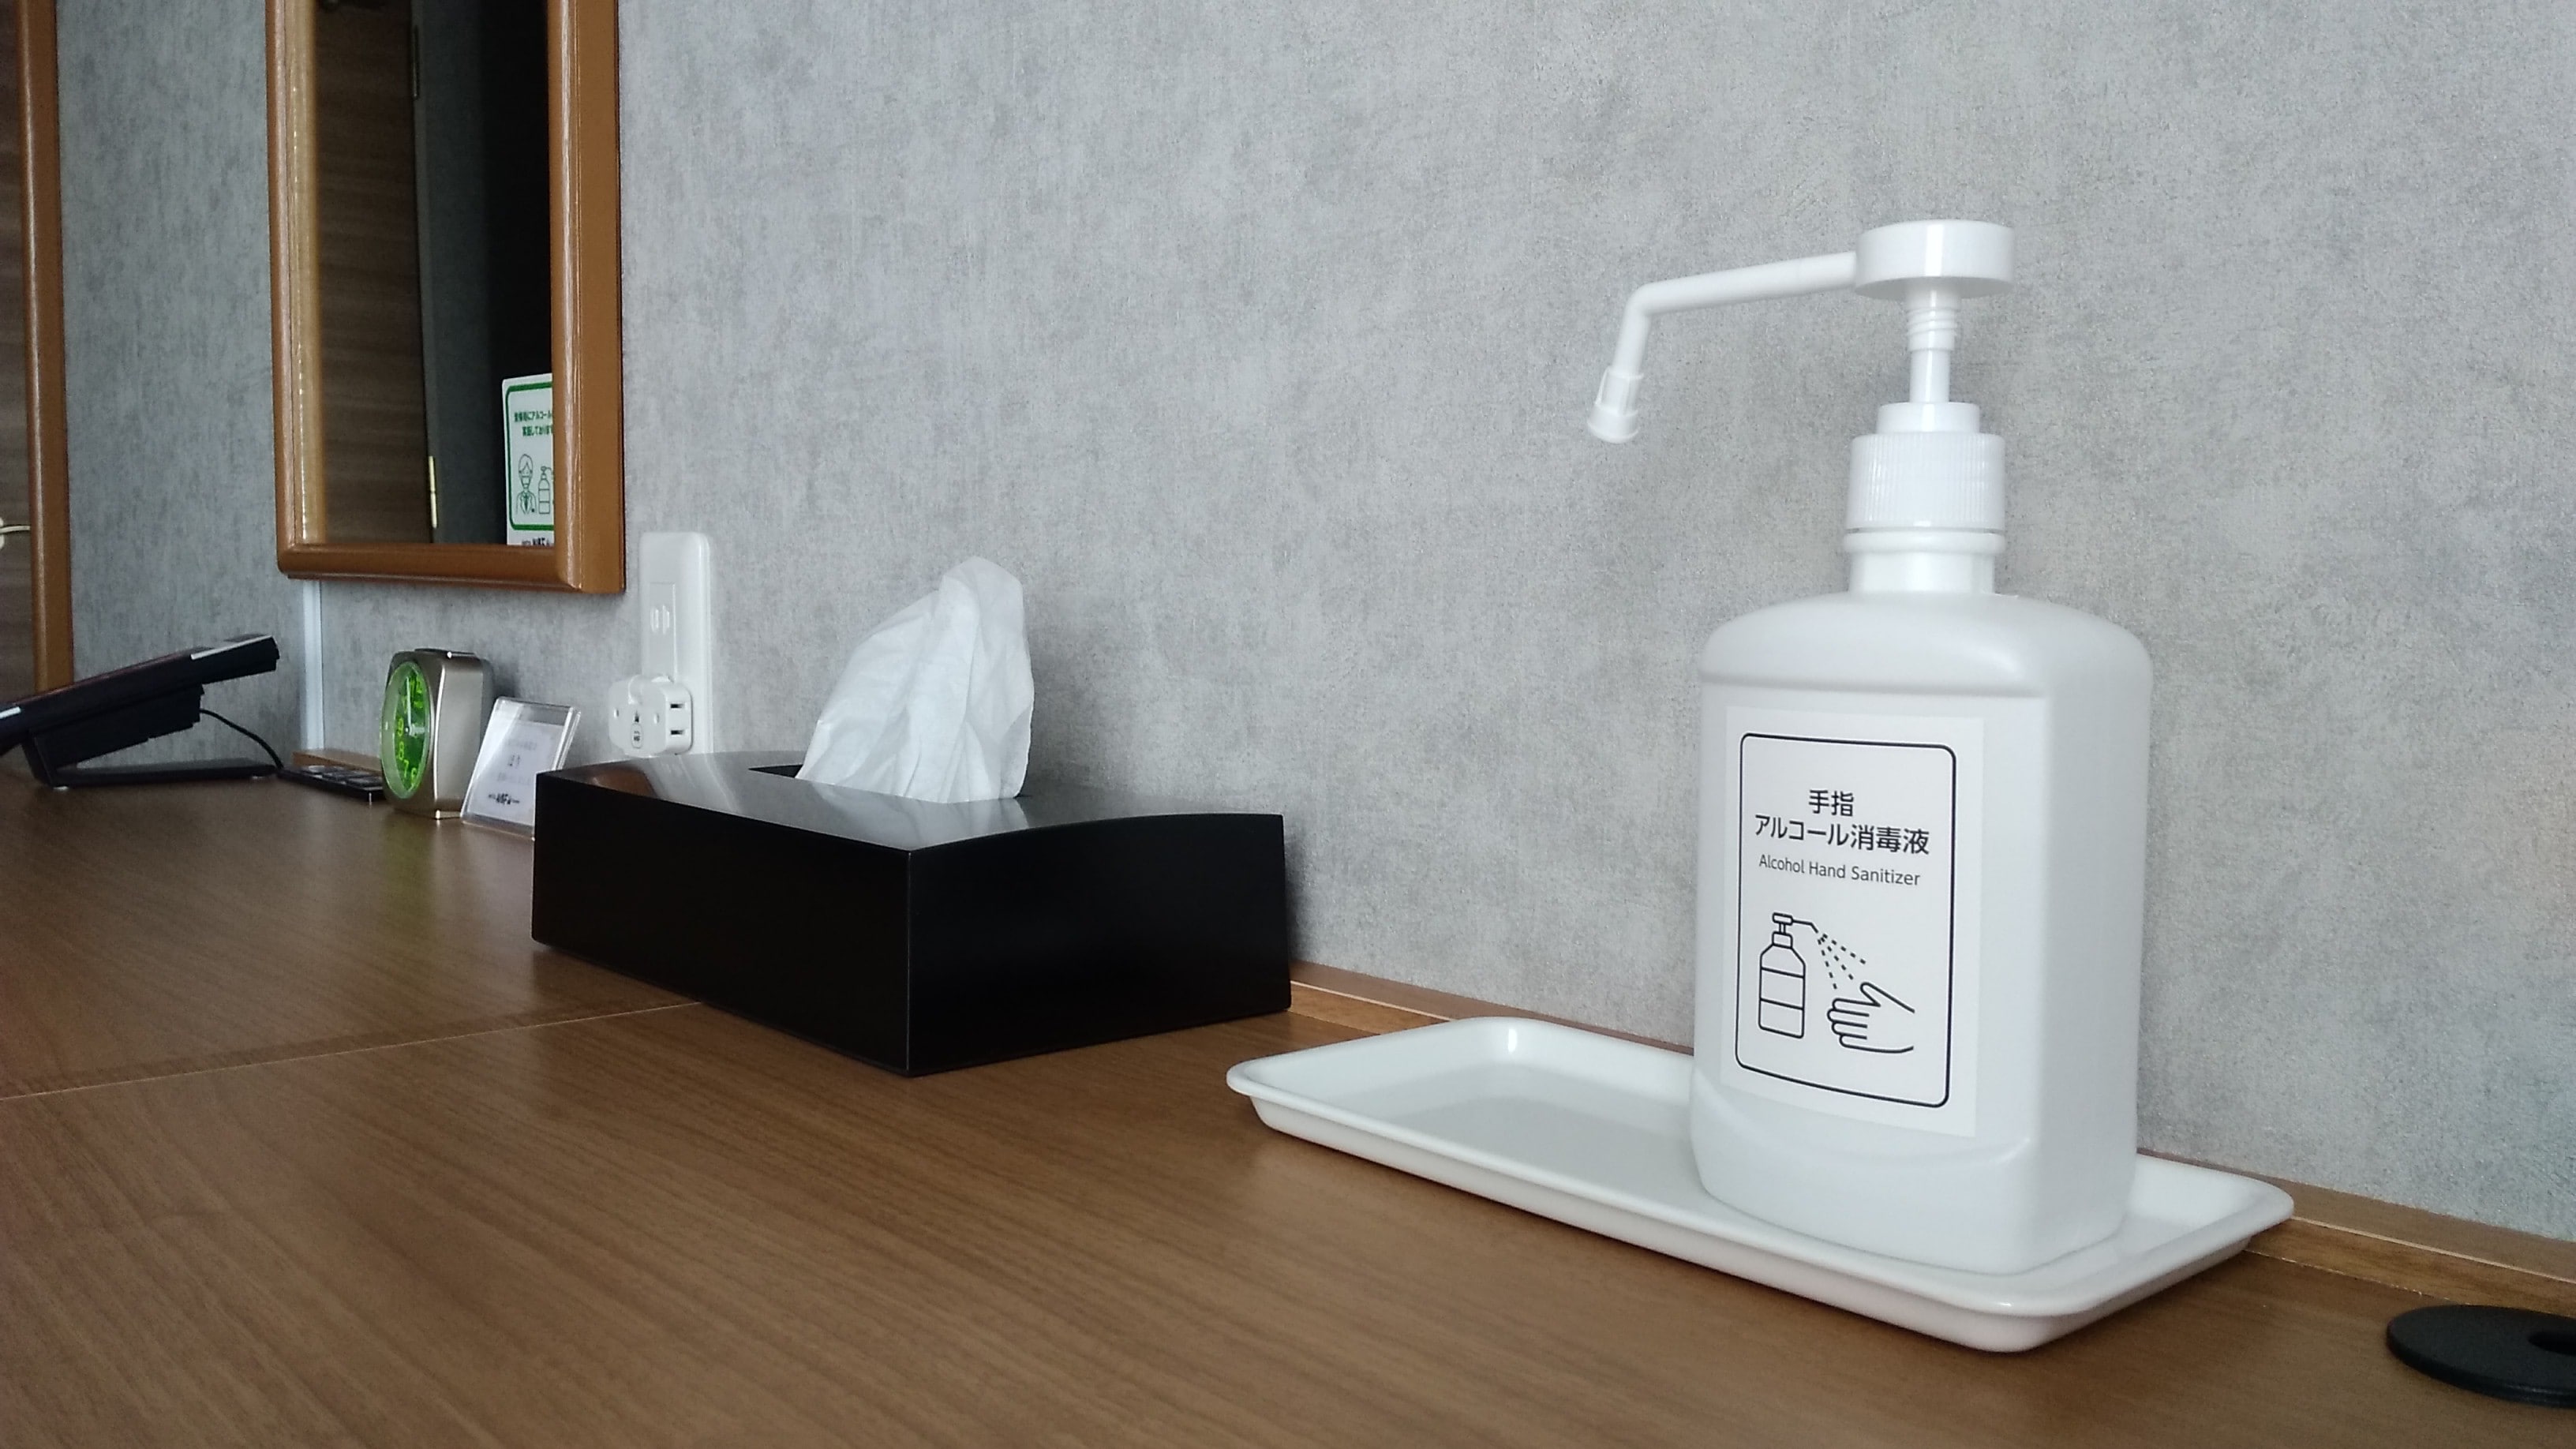 All guest rooms are equipped with antiseptic solution ♡ Peace of mind